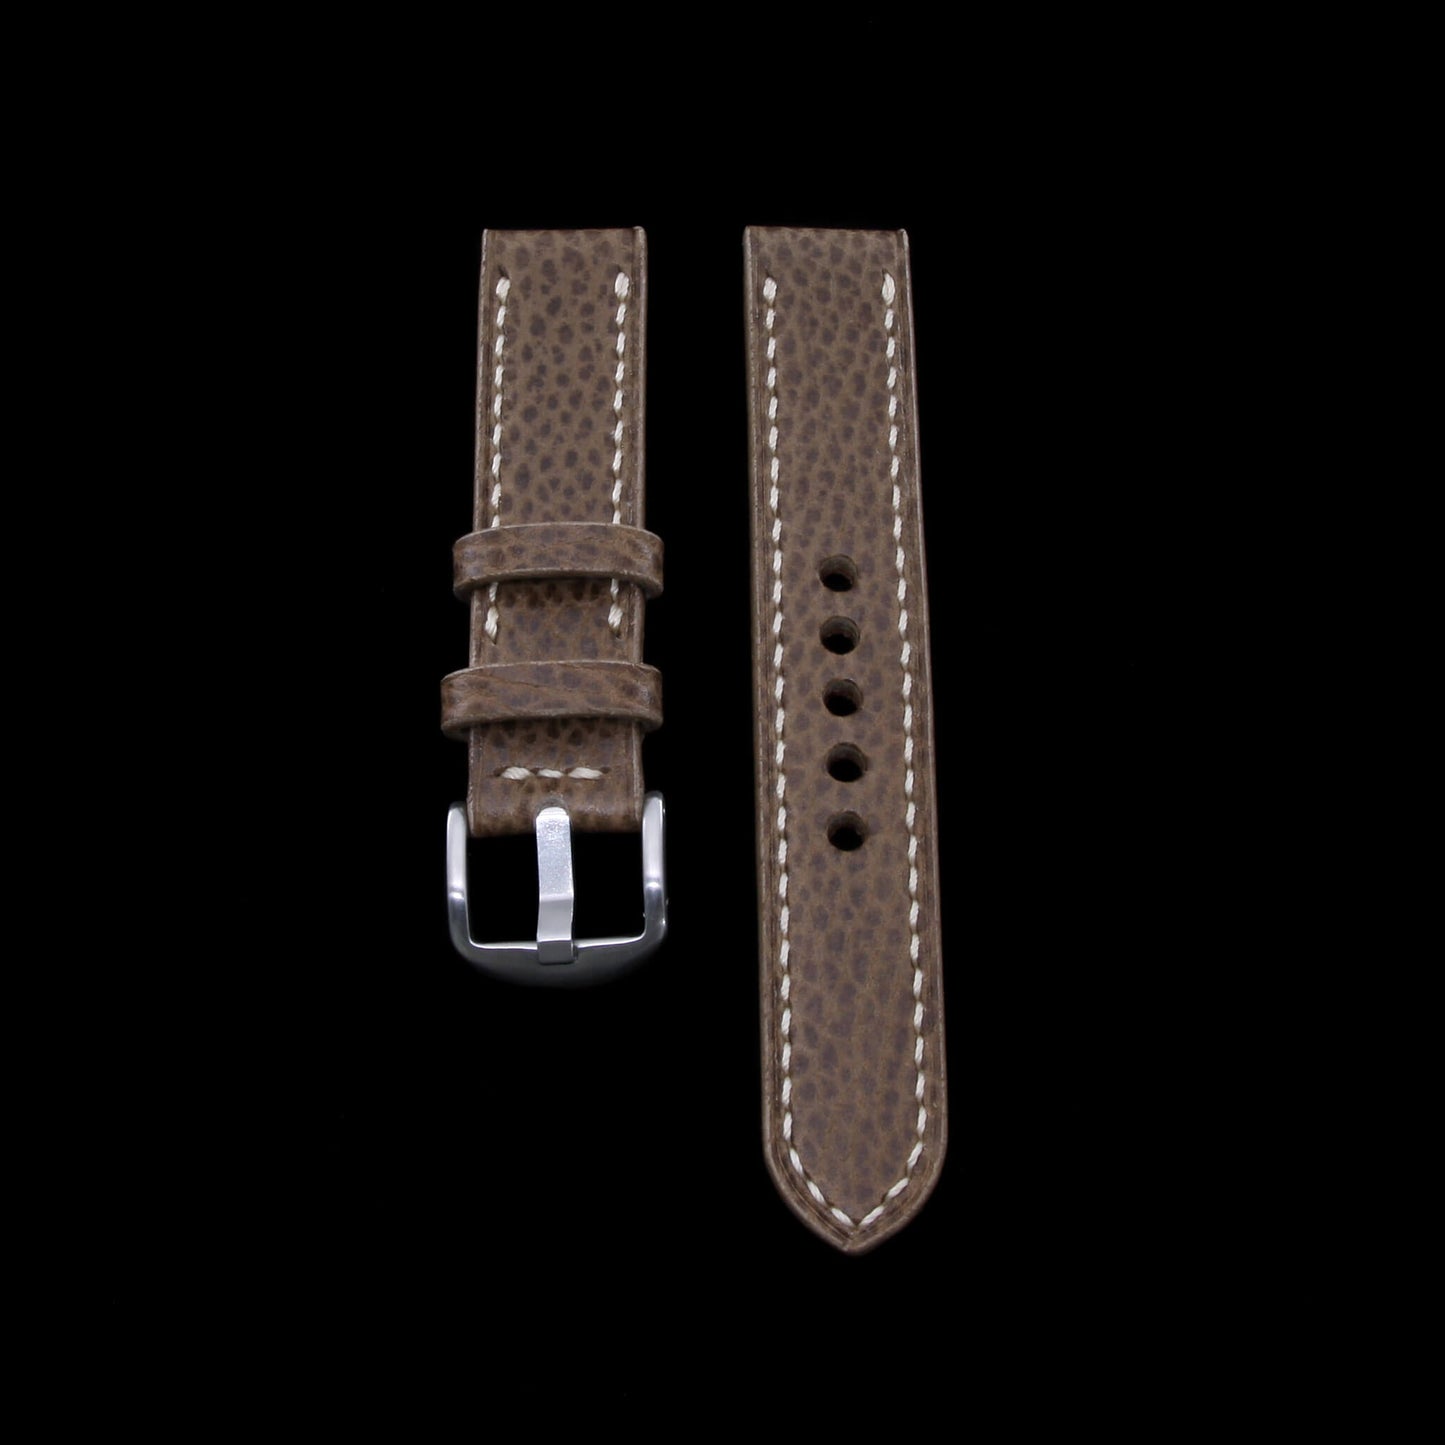 2nd View of 2-Piece Full Stitch Leather Watch Strap, made with Buttero Taupe full grain Italian veg-tanned leather by Cozy Handmade